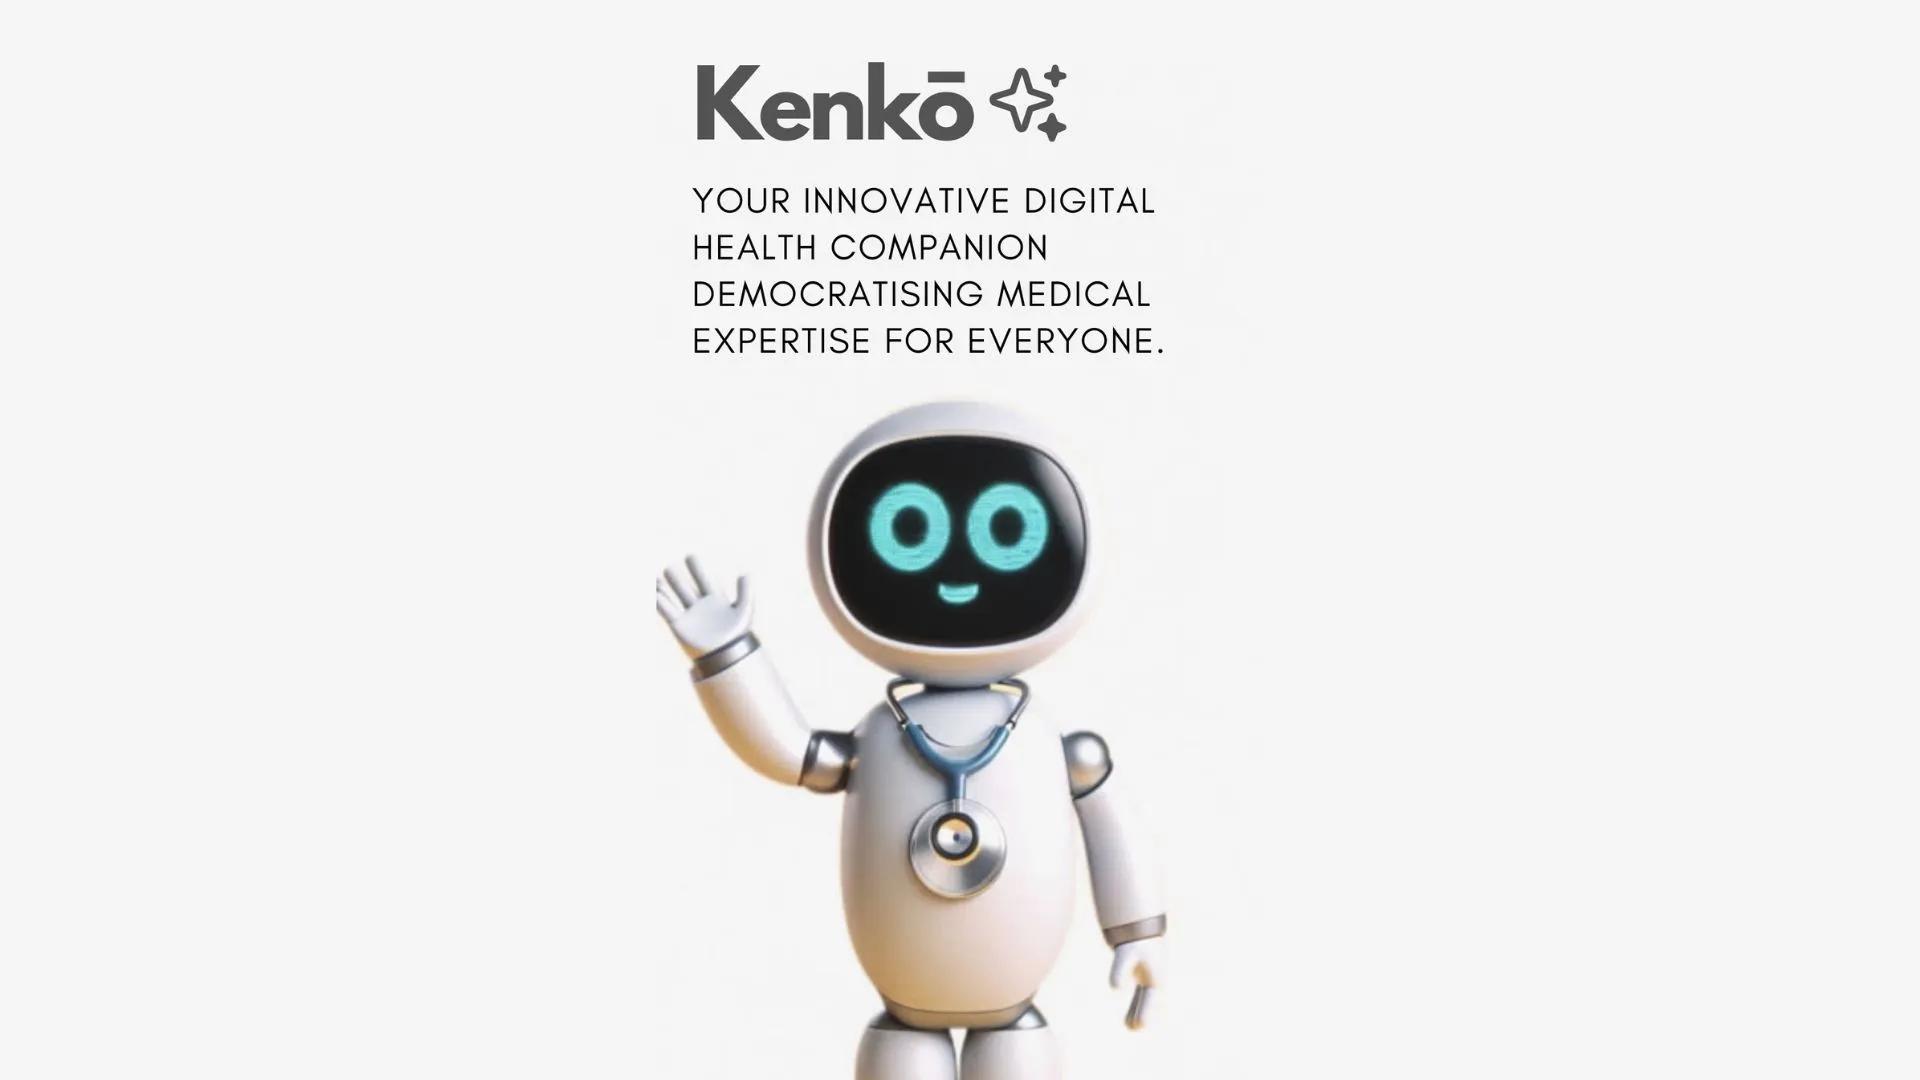 Update: Kenkō submitted for the PartyRock Hackathon